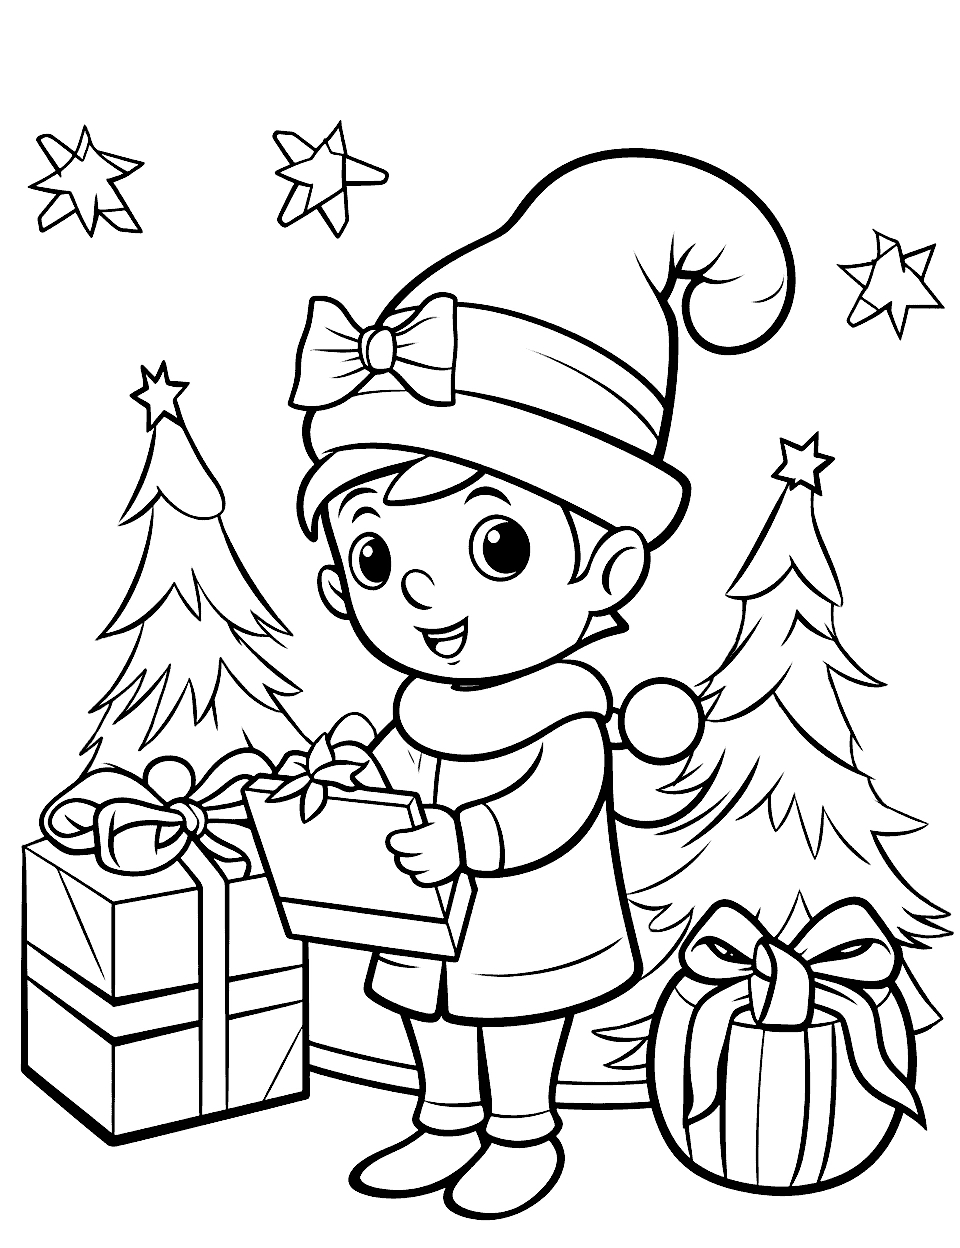 100 Christmas Coloring Pages: Free Printable Sheets regarding Free Christmas Coloring Printables